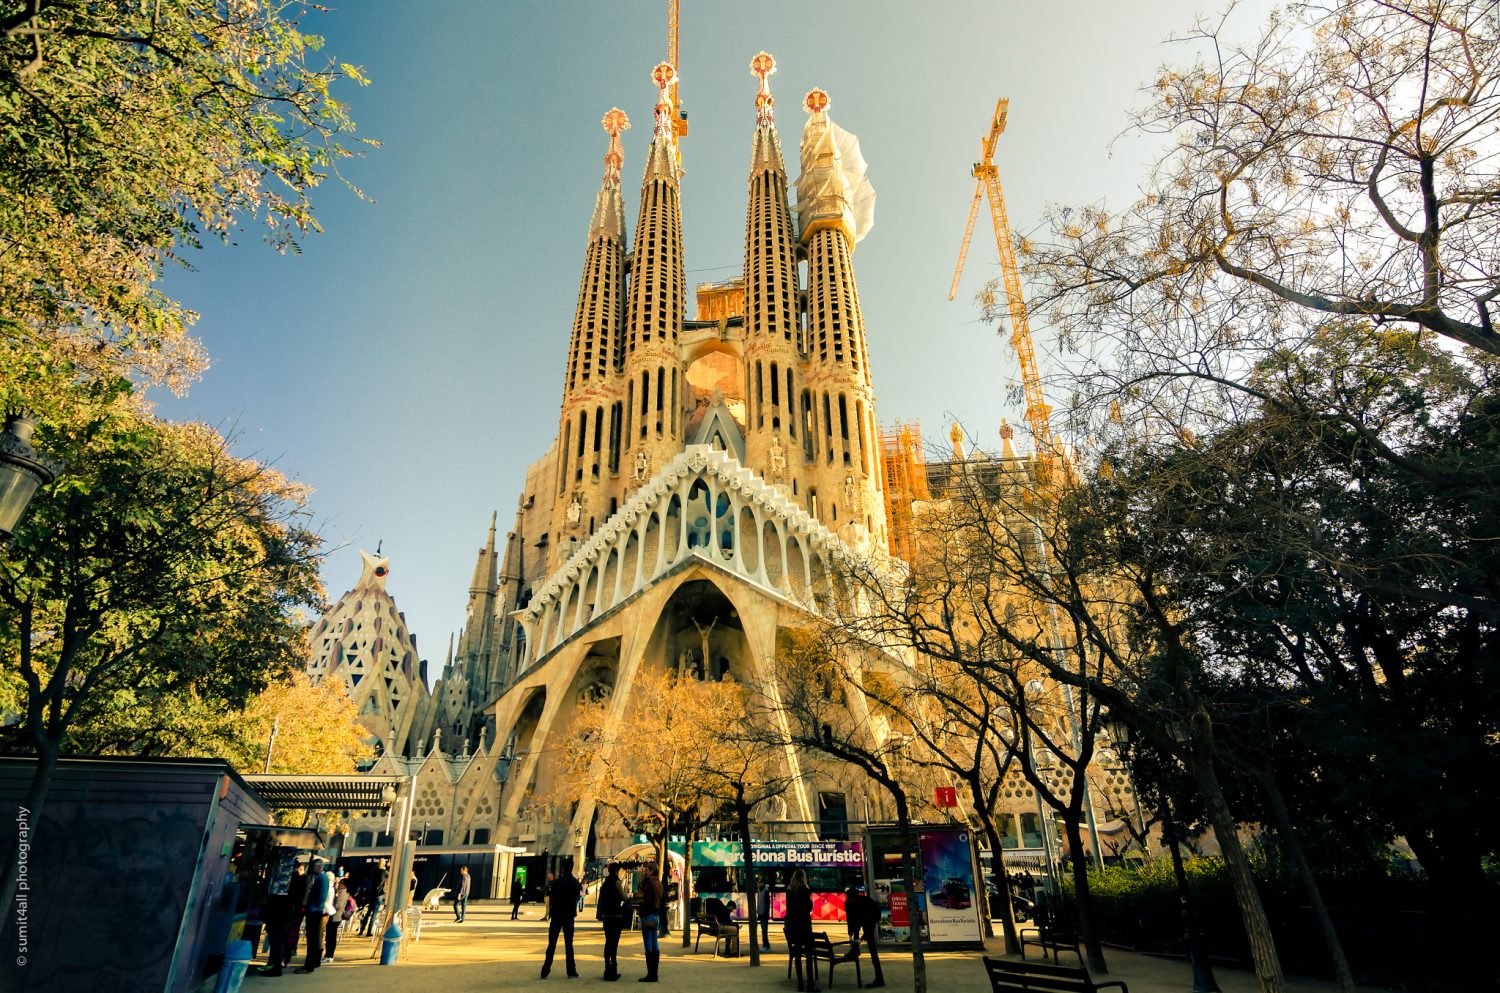 Under construction for over 120 years, the Sagrada Familia is one of the most amazing pieces of architecture in the whole world.